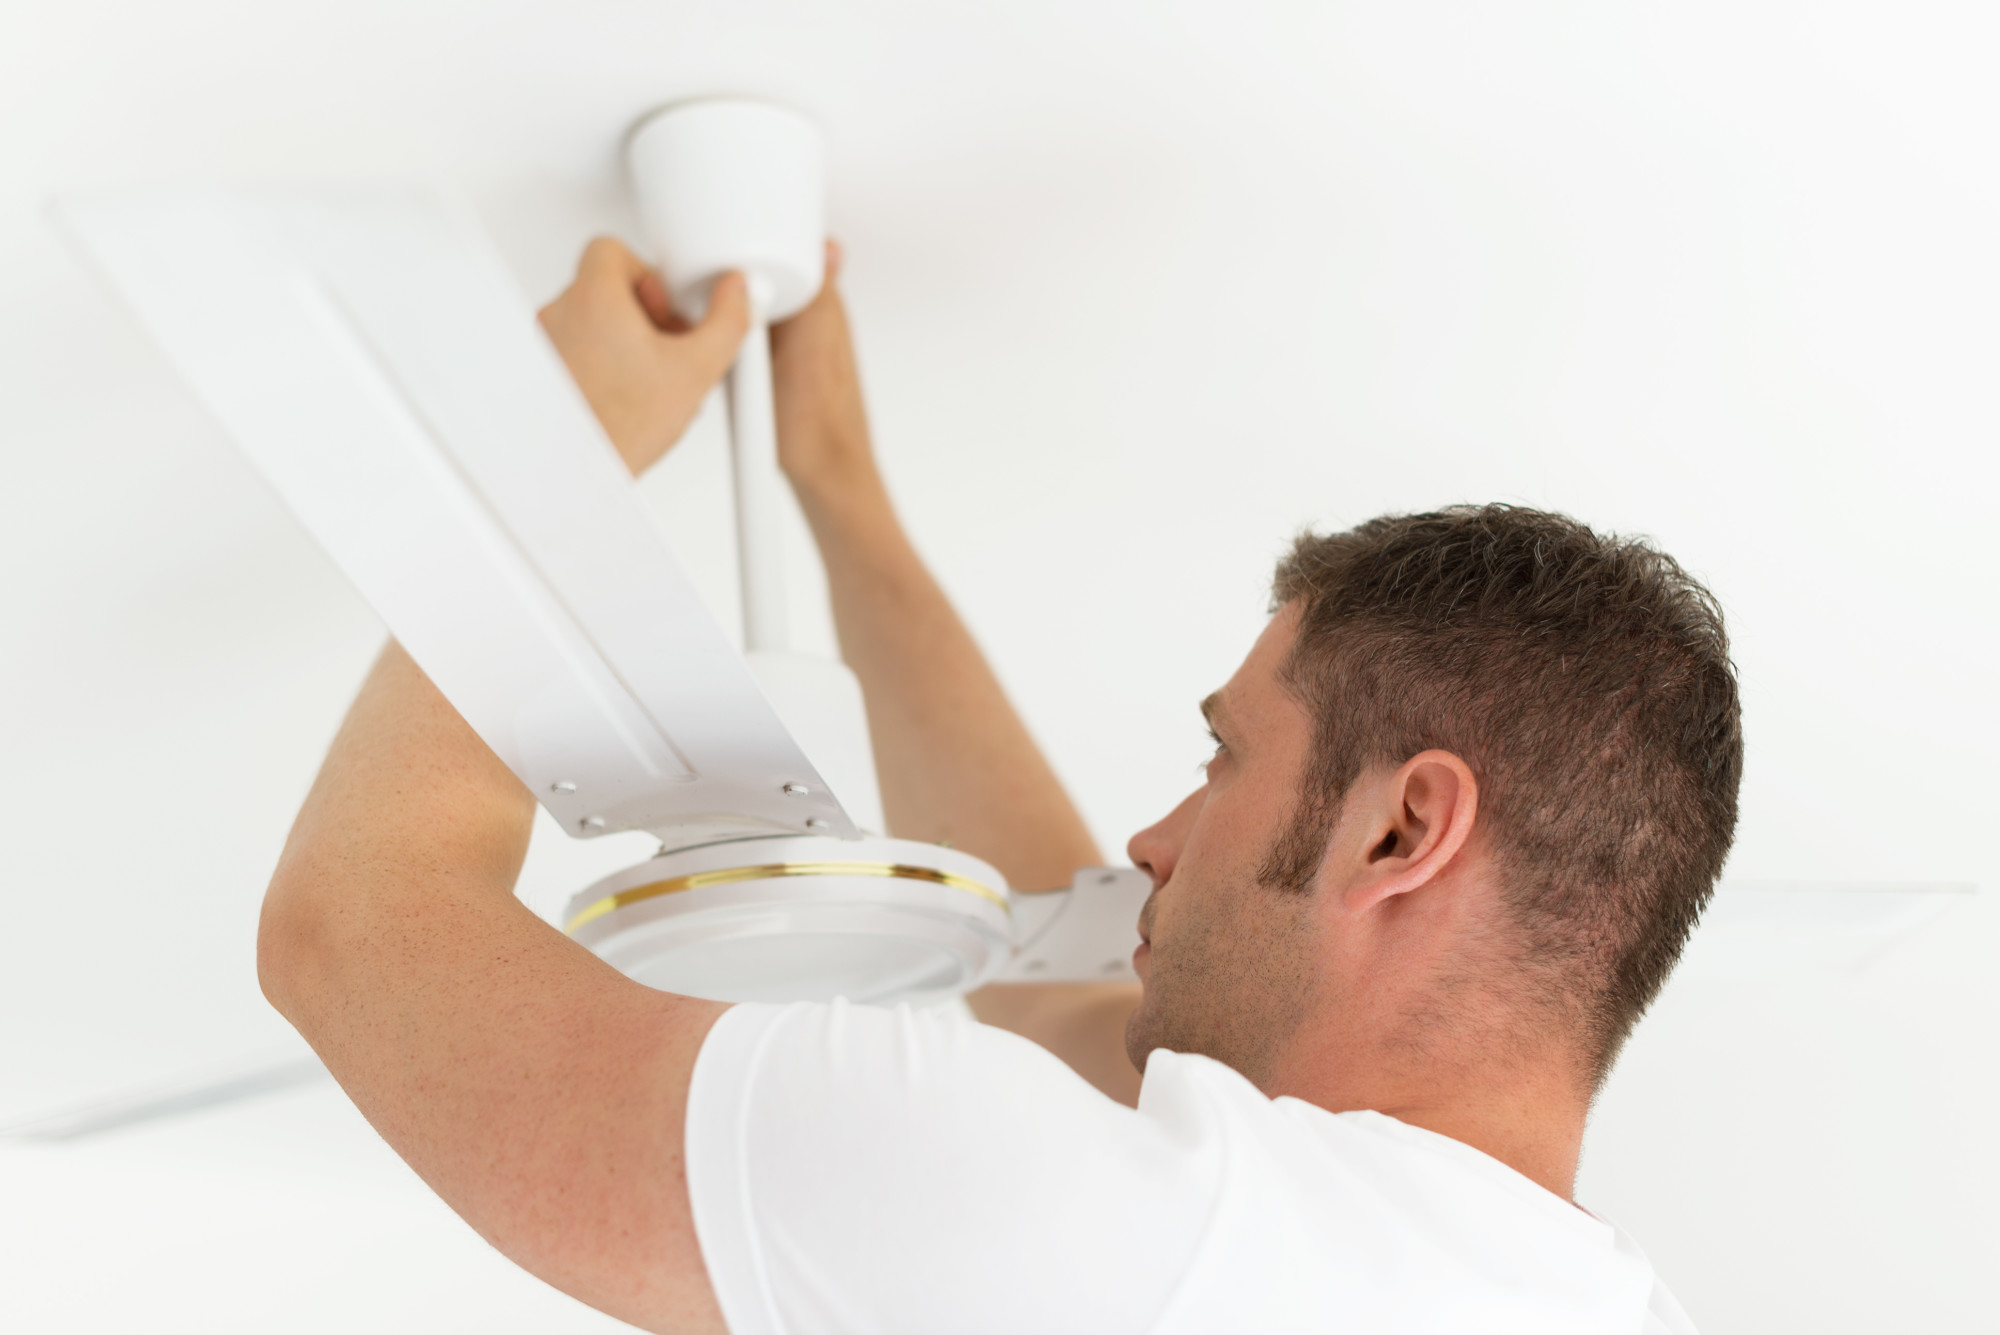 How To Install a Ceiling Fan